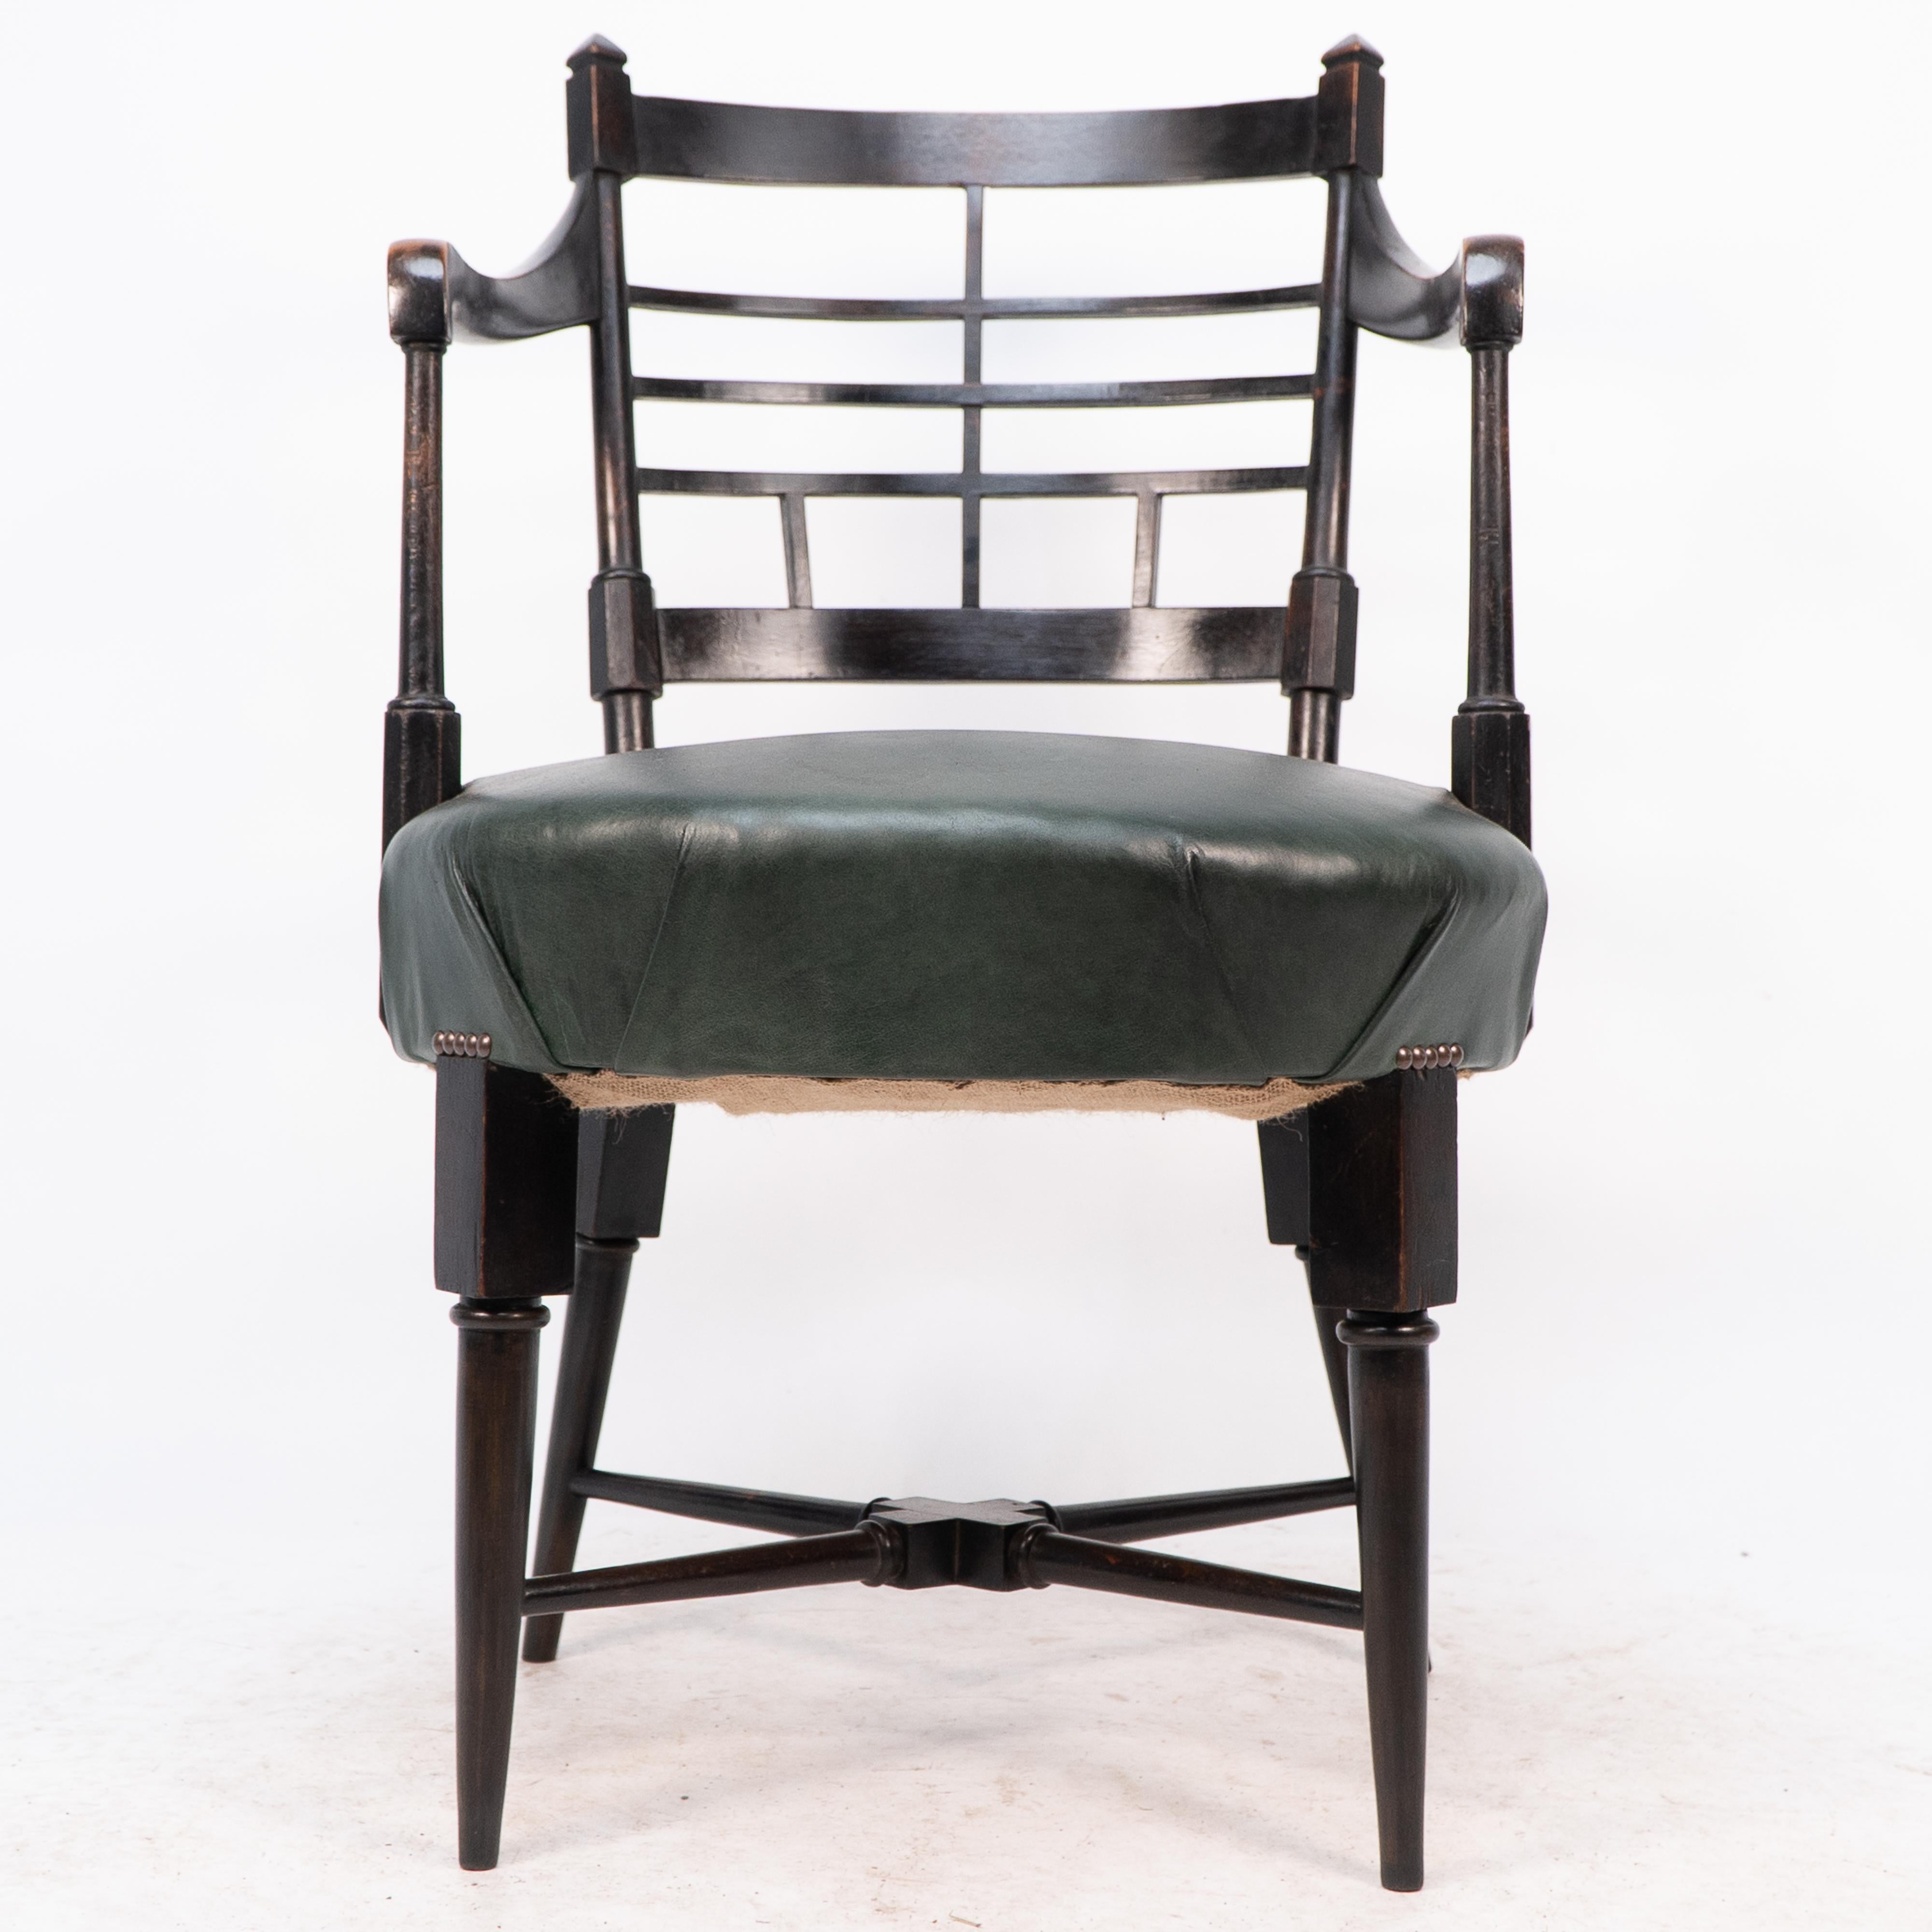 E W Godwin for William Watt. An Anglo-Japanese Old English or Jacobean armchair For Sale 6